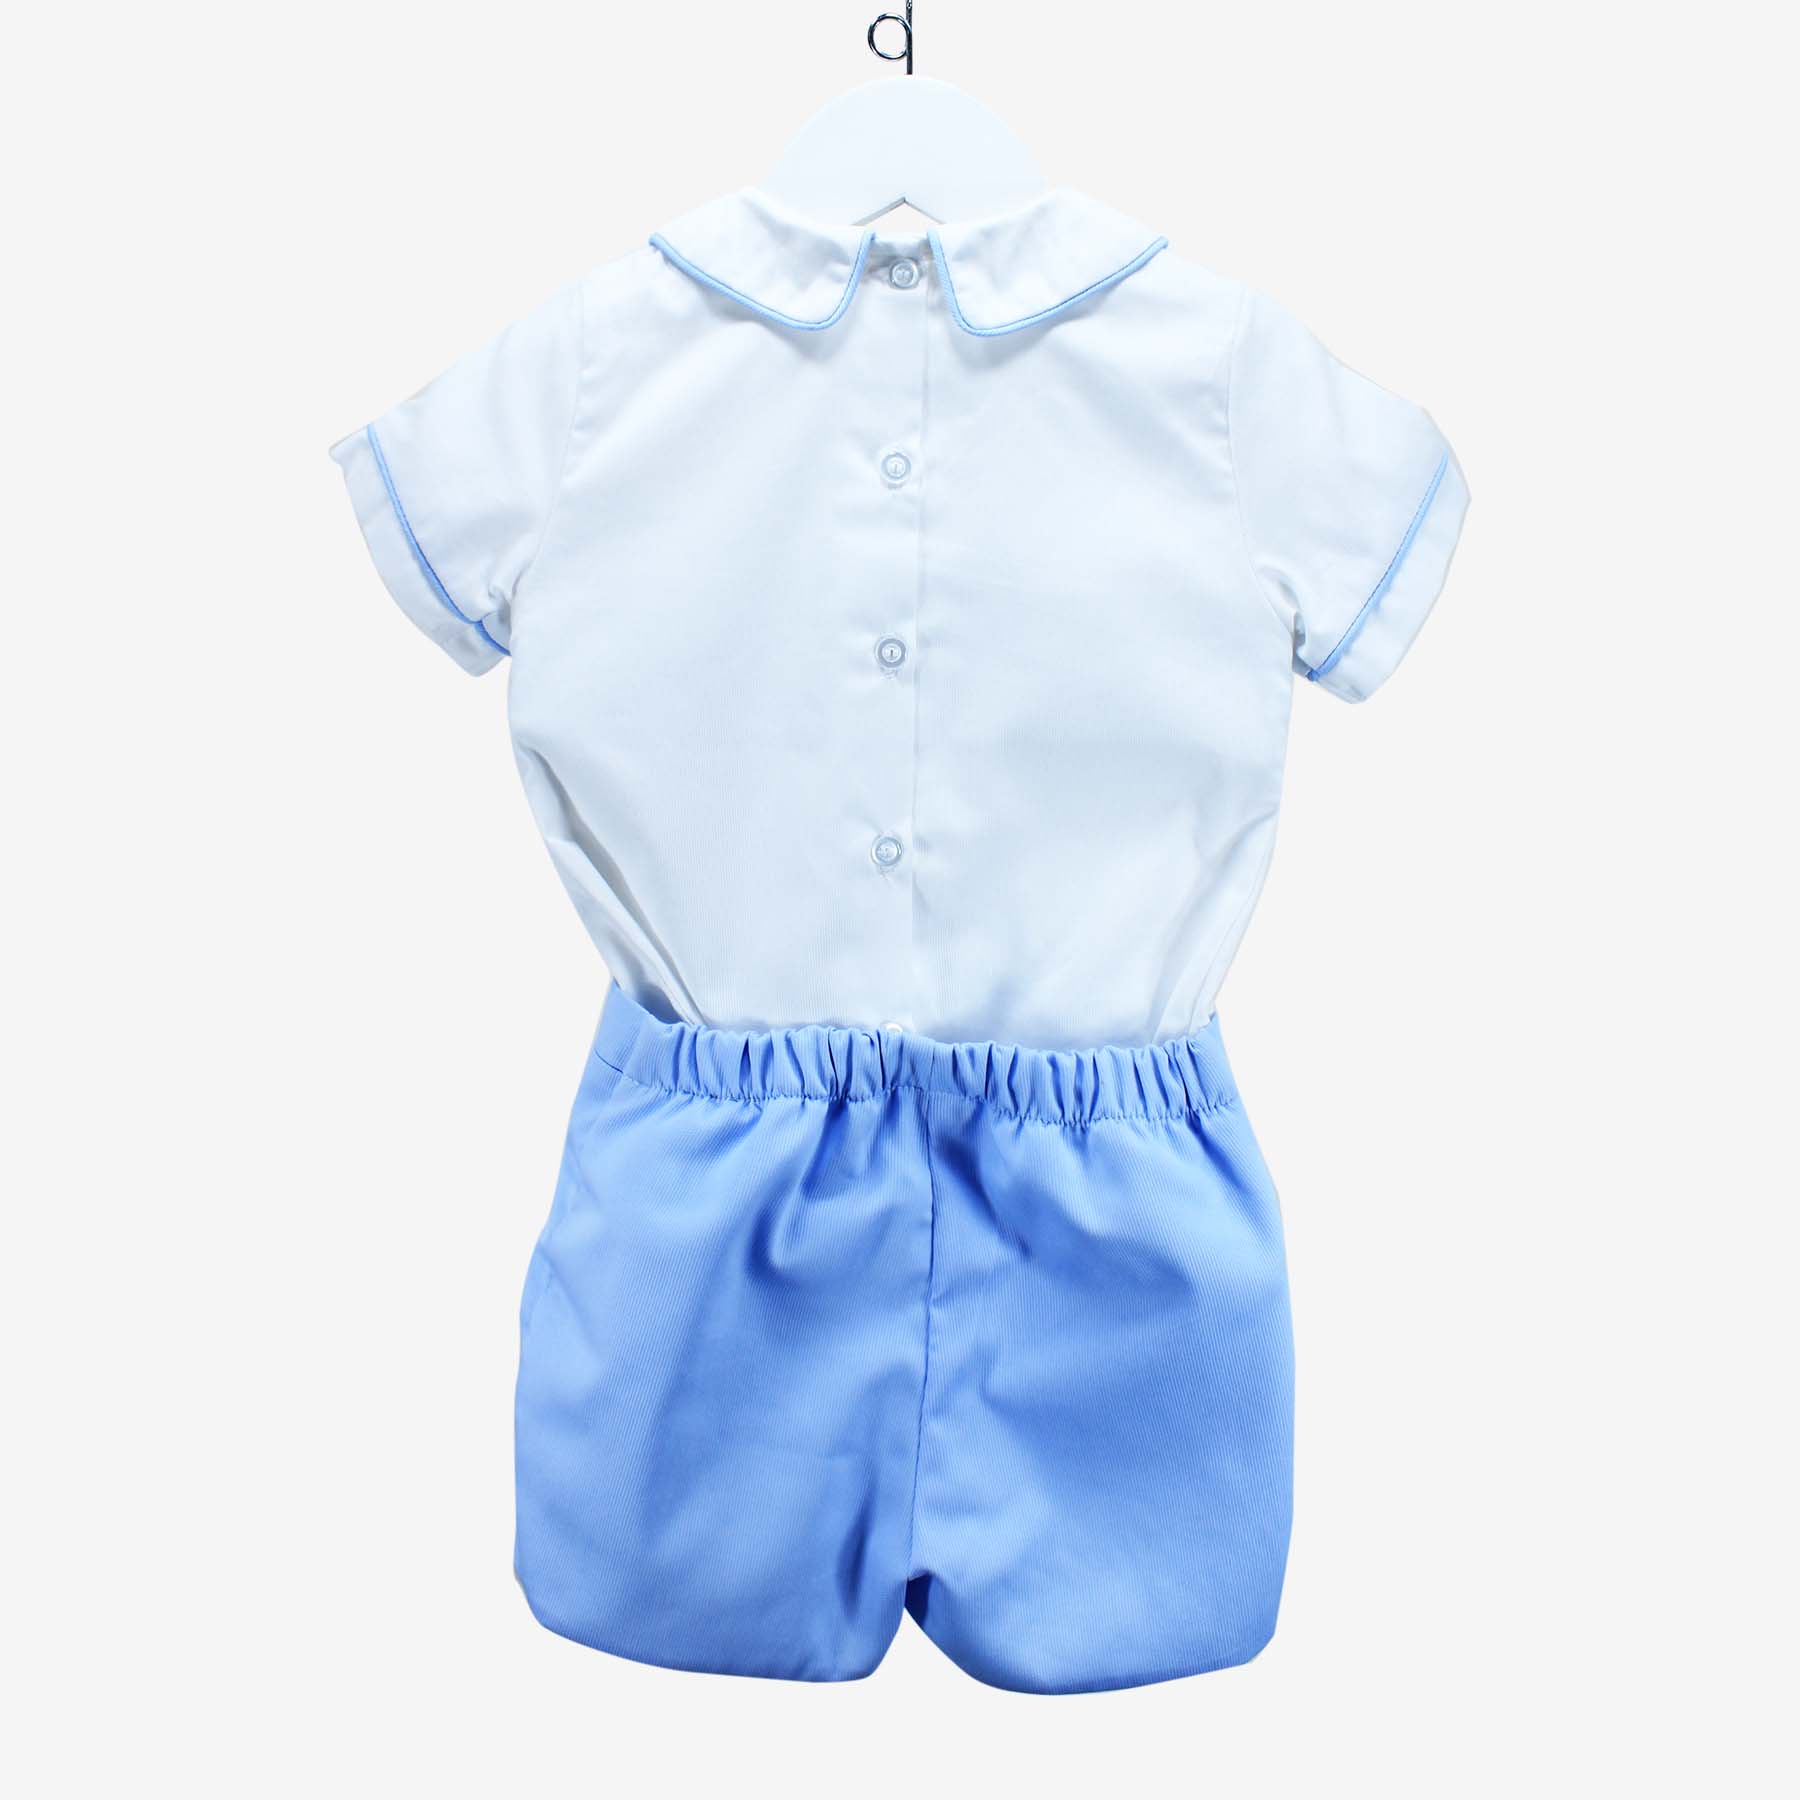 Charming Little One Pretty Children's Clothing